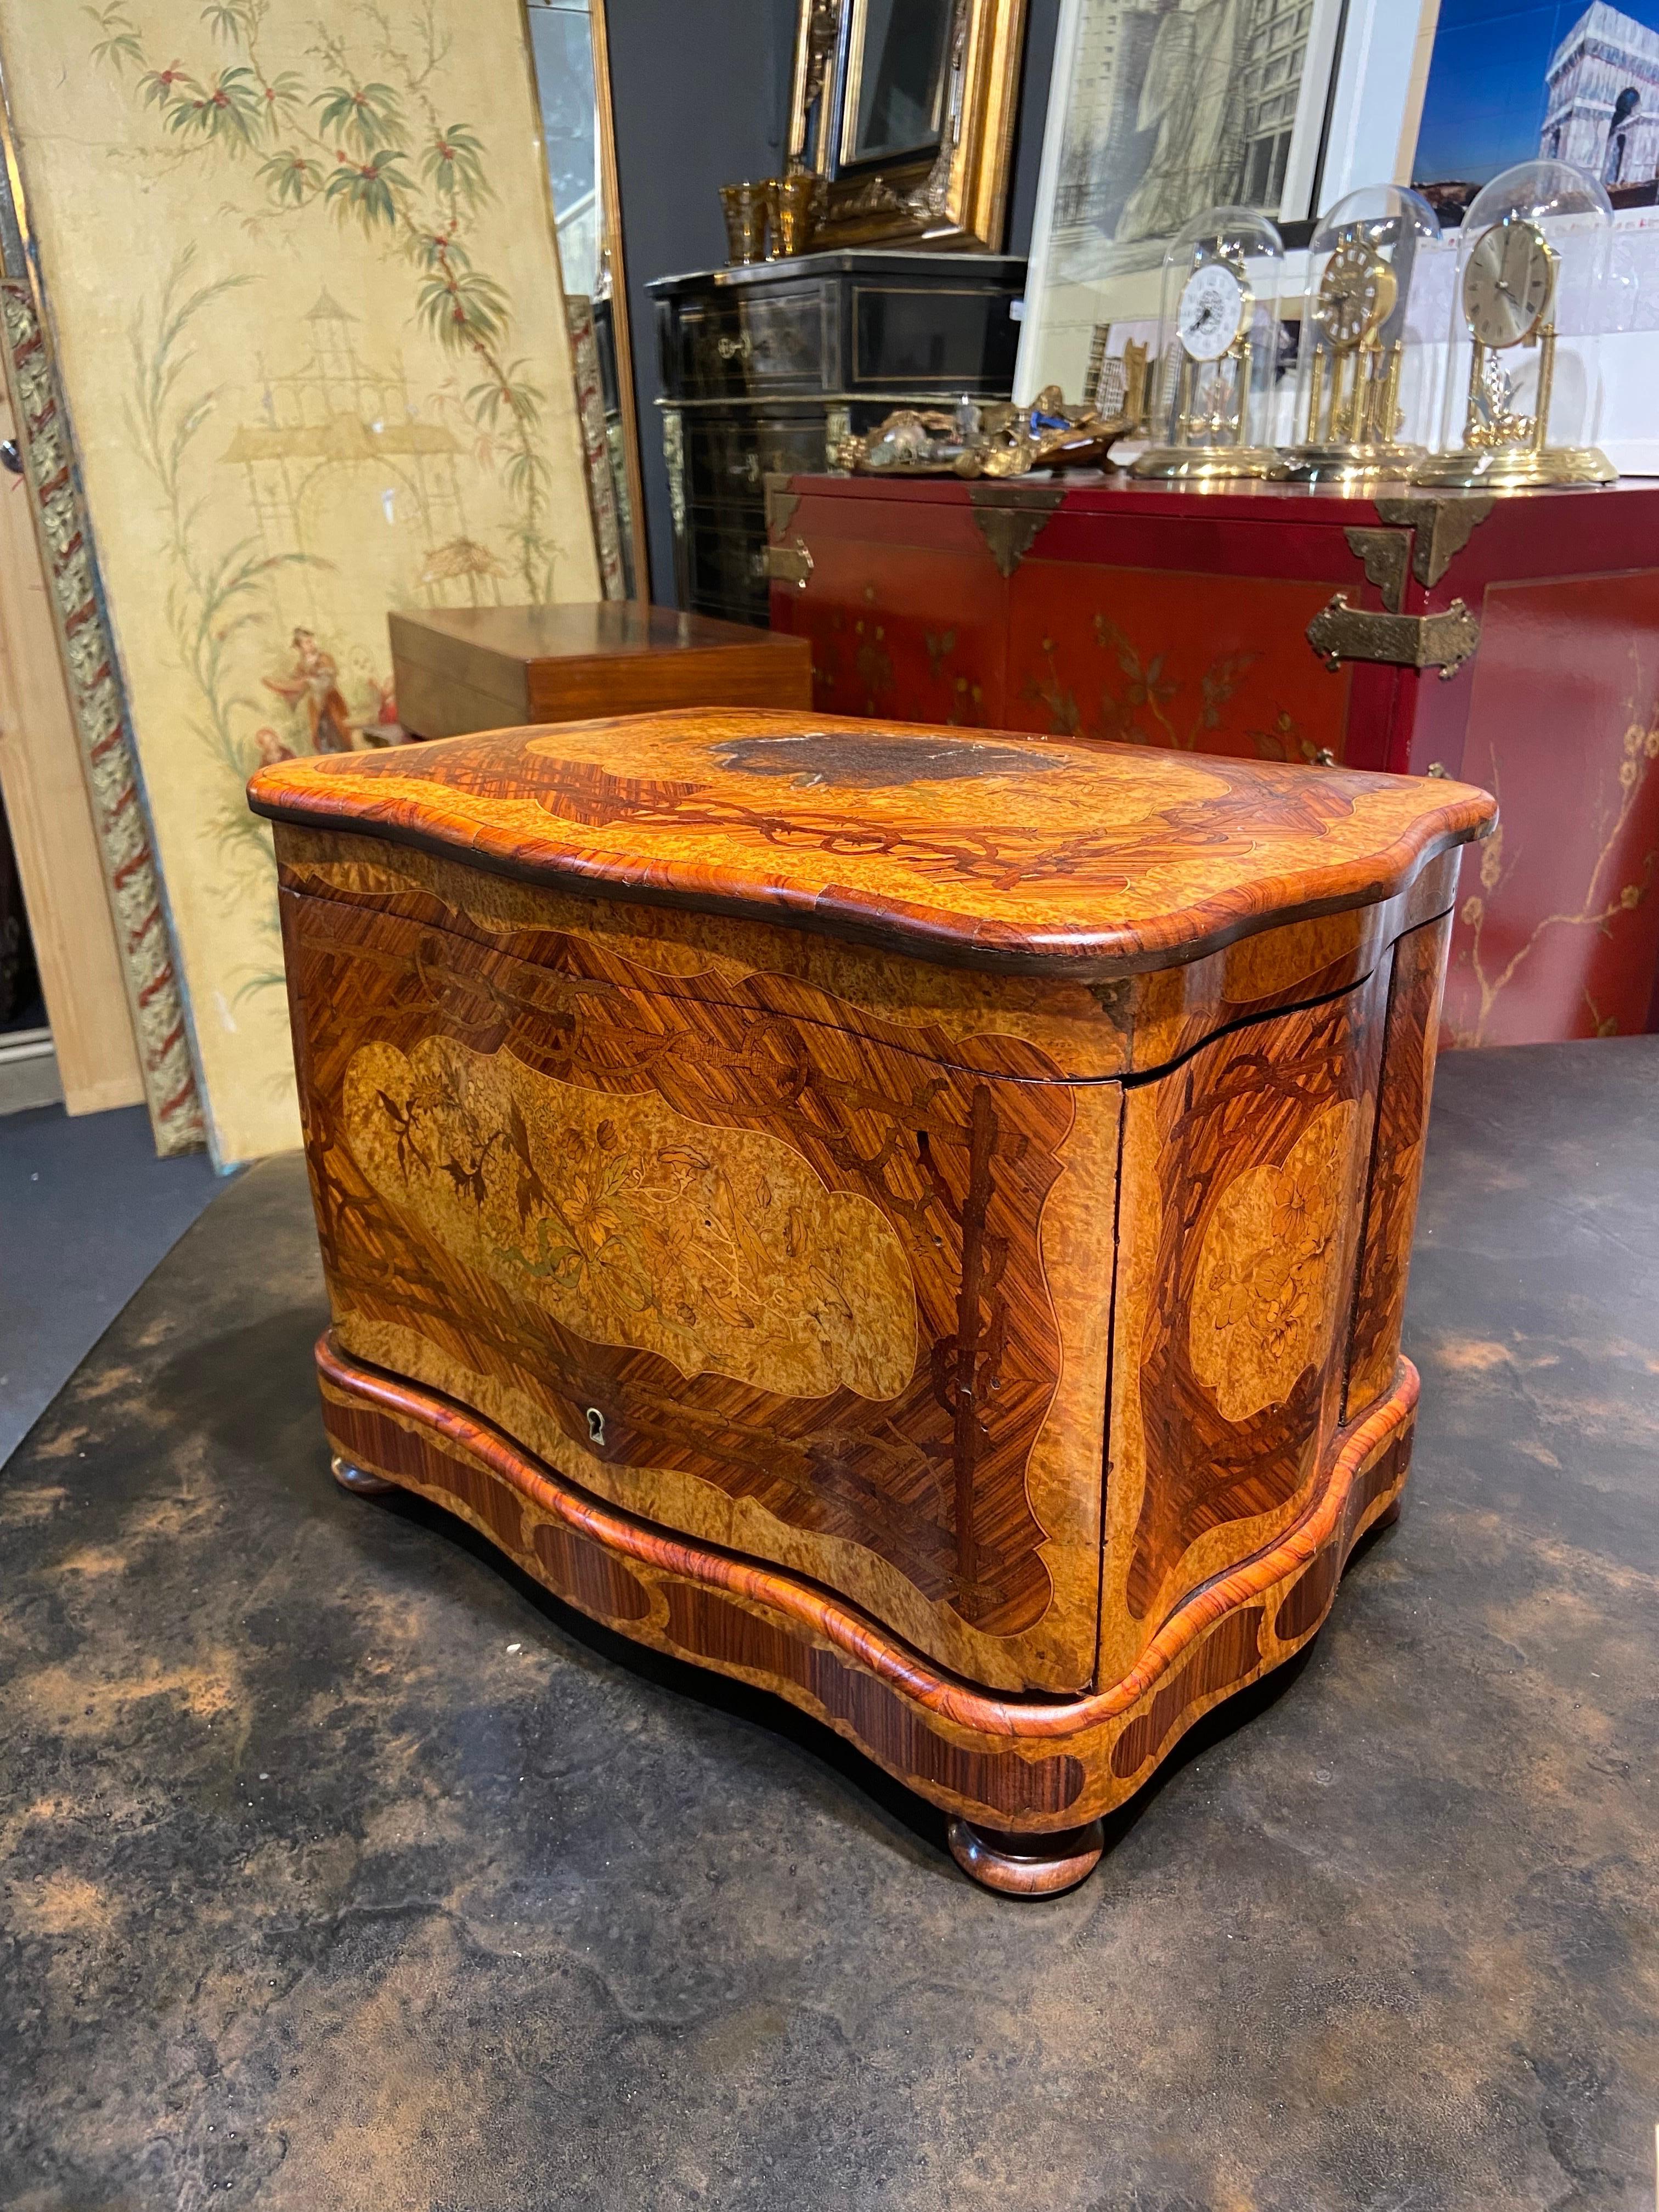 Foldable 19th Century French hand carved marquetry walnut liquor cellar.
Overall good condition except the top of the box which was burned quite bed and no restorations have been made. 
France, circa 1880.
 